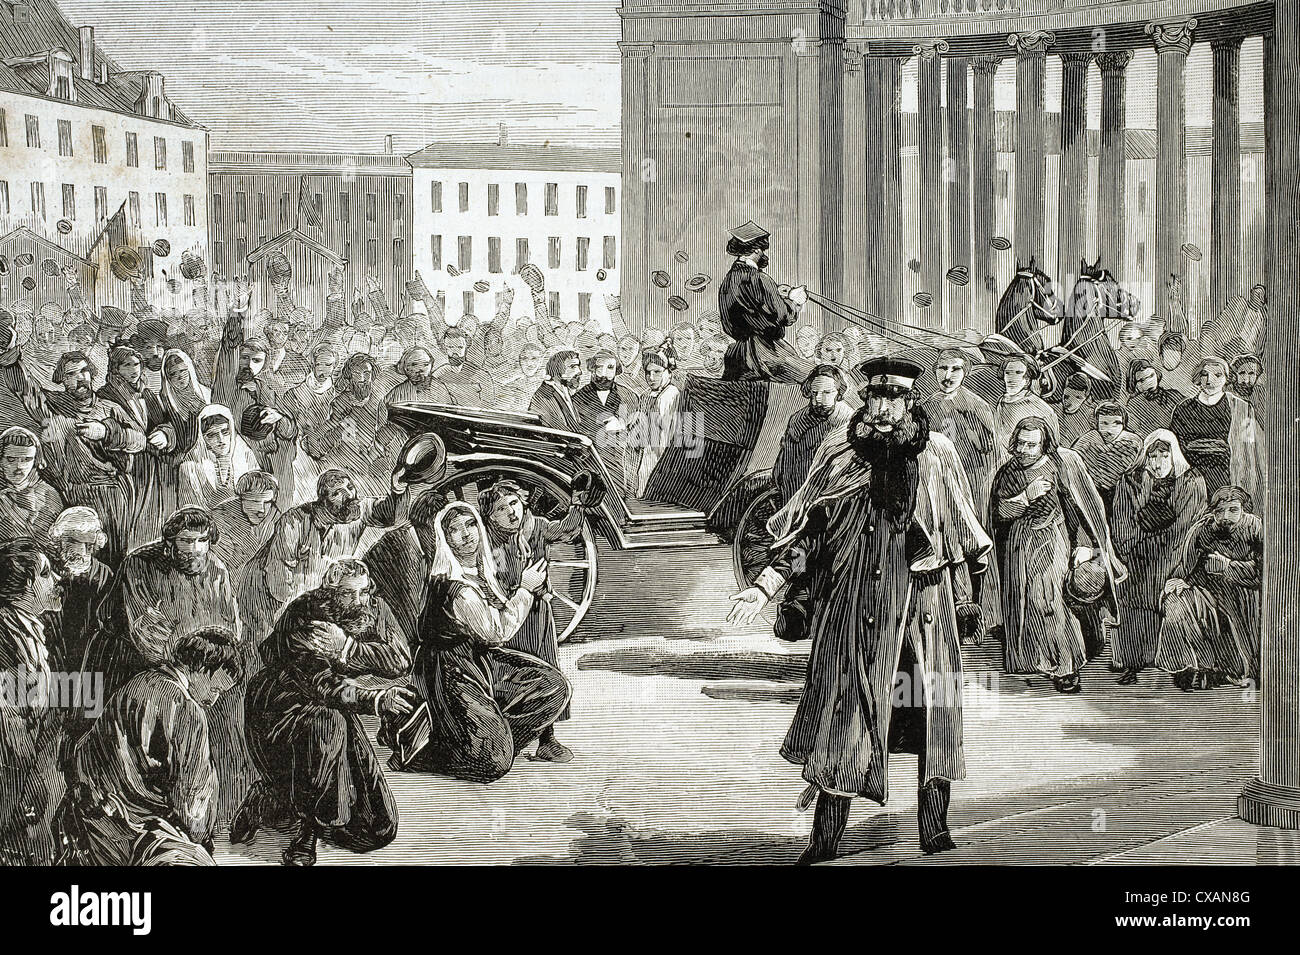 Russia. St. Petersburg. 19th century. Ovation of the people to the Czar after being the victim of an attack. Stock Photo